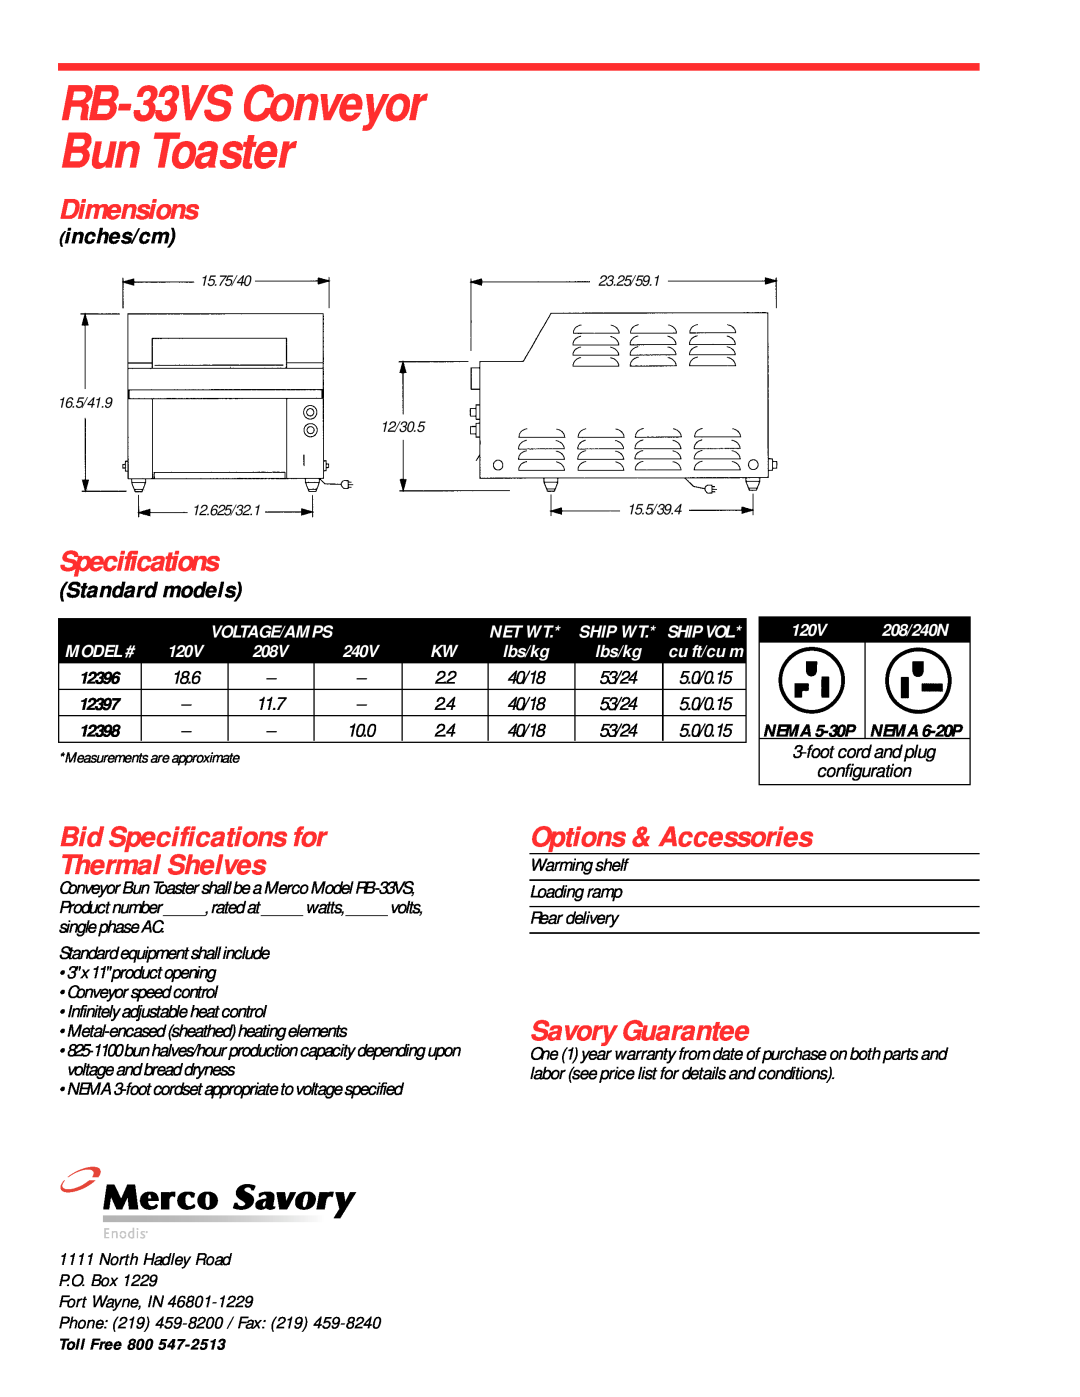 Merco Savory RB-33VSConveyor Bun Toaster, Dimensions, Bid Specifications for Thermal Shelves, Options & Accessories 